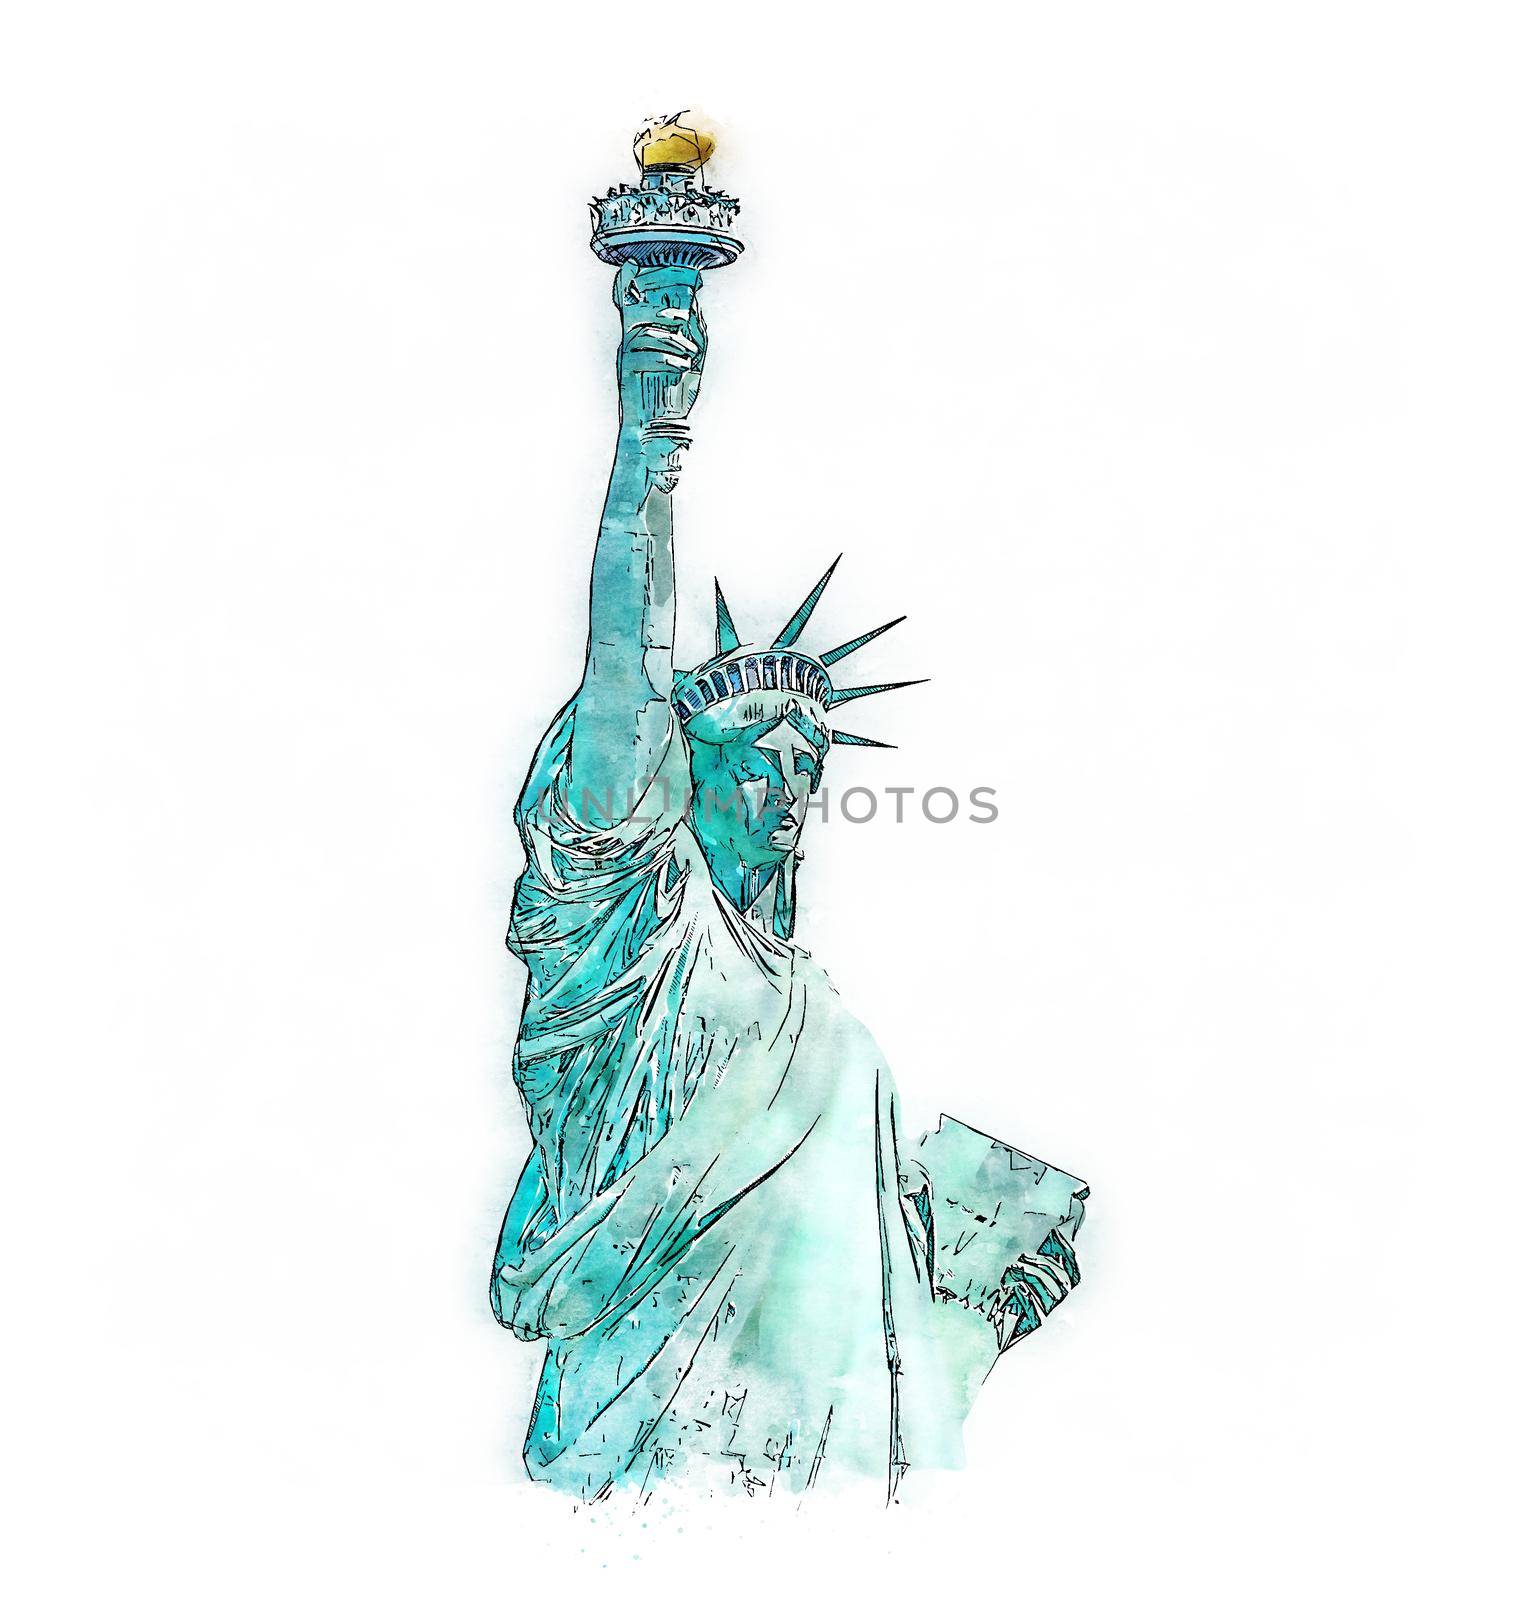 Watercolor painting illustration of the Statue of Liberty isolated on white background by Mariakray